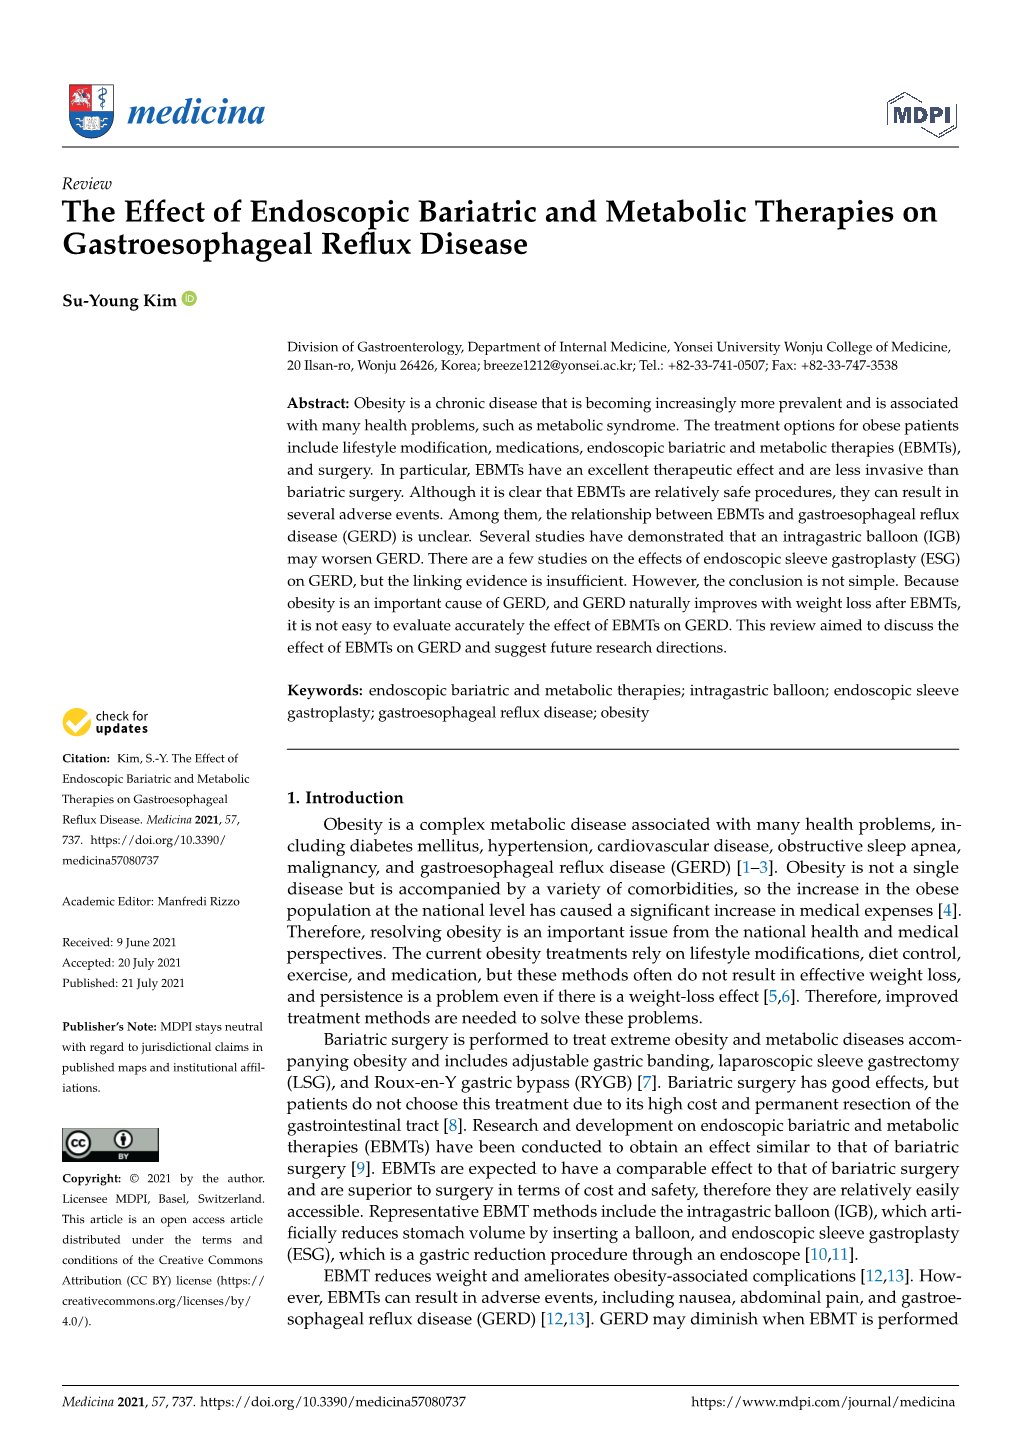 The Effect of Endoscopic Bariatric and Metabolic Therapies on Gastroesophageal Reﬂux Disease